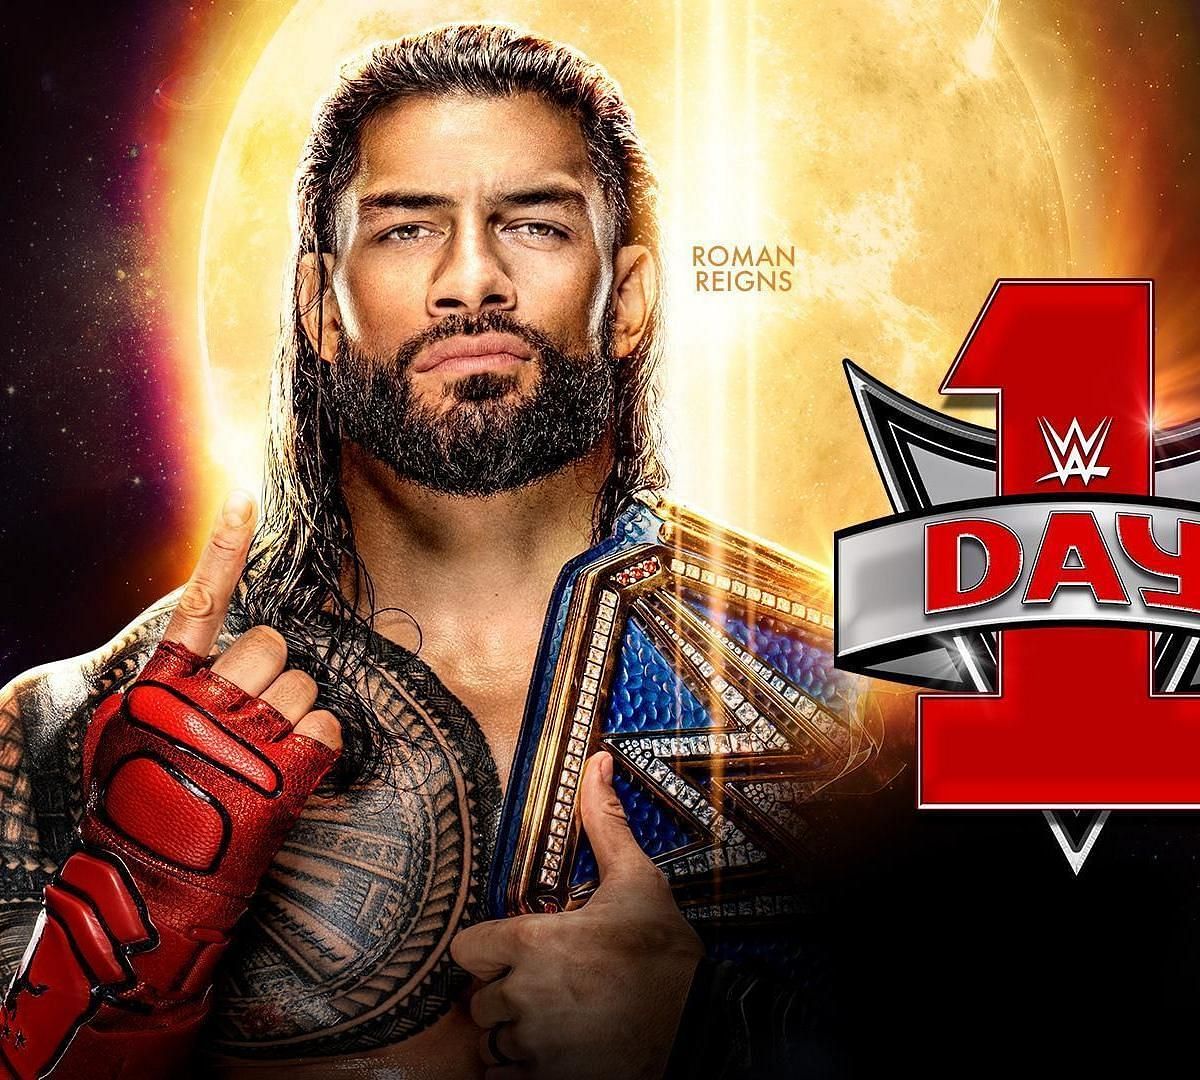 Roman Reigns was missing from WWE Day 1 last year